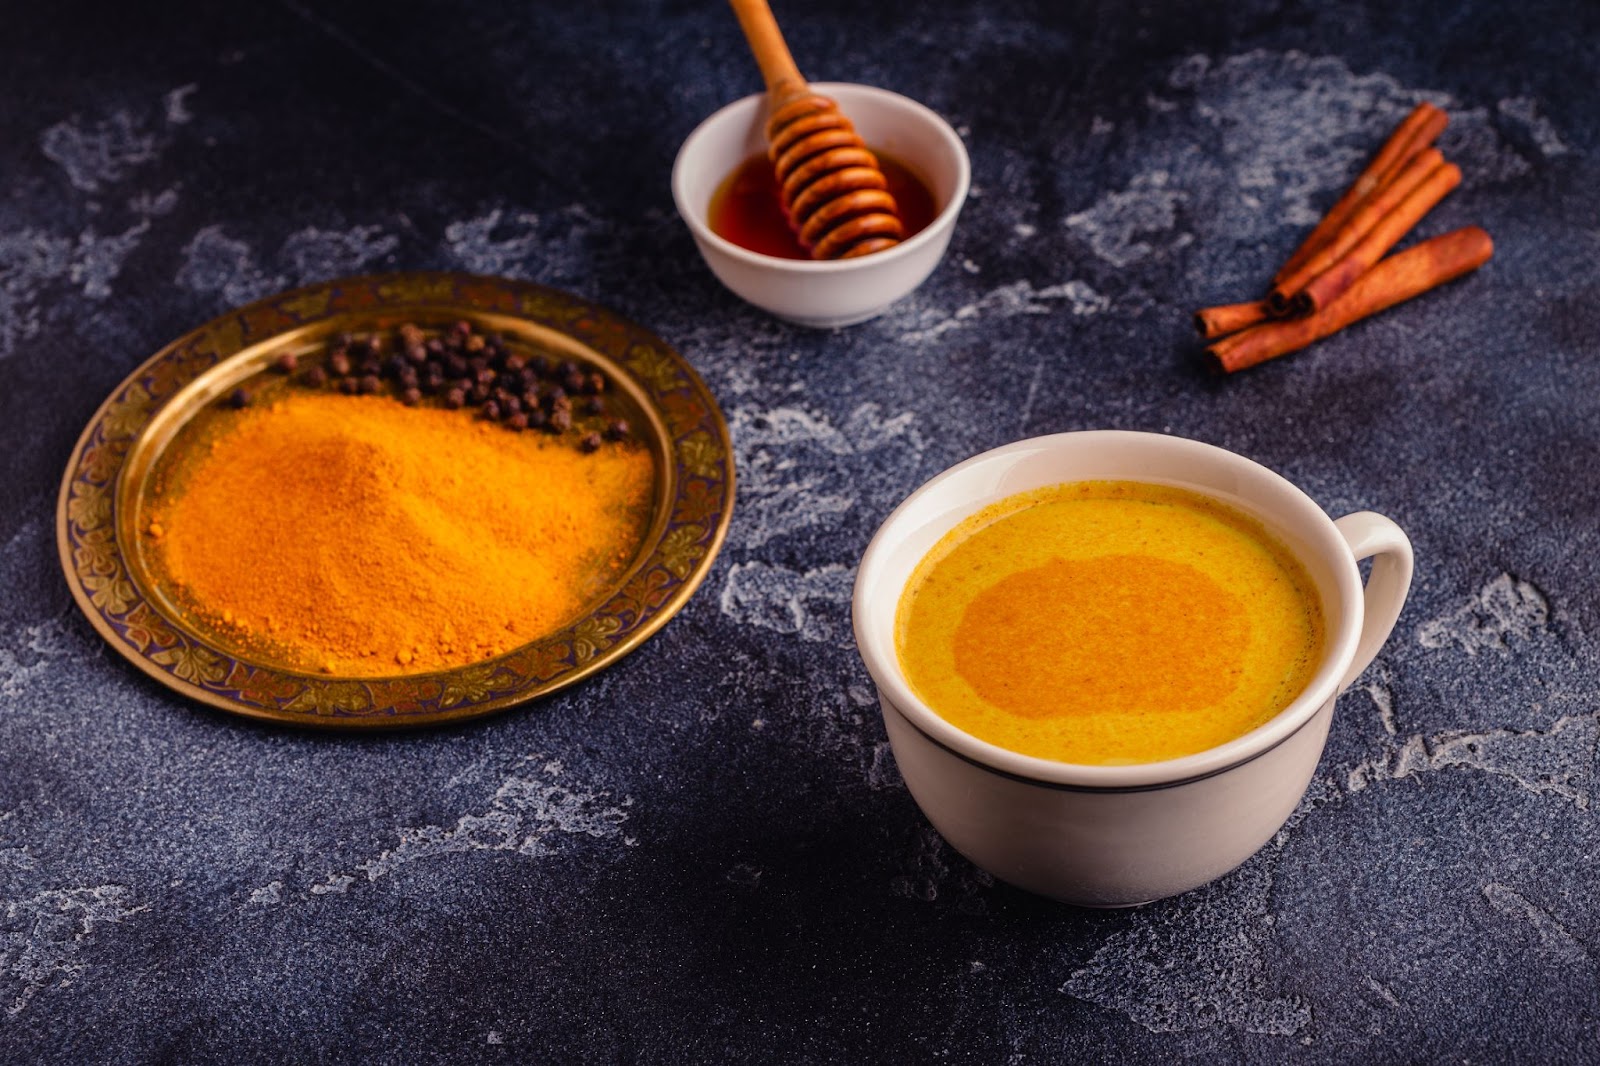 <p>Turmeric, a vibrant yellow spice celebrated for its culinary uses, is also a nutritional powerhouse. Its active compound, curcumin, boasts potent antioxidant and anti-inflammatory properties that have been linked to a wide range of health benefits. Studies suggest that curcumin may offer protection against chronic diseases such as Alzheimer's, cancer, and other age-related conditions.</p> <p>Incorporating turmeric into your diet is a simple and flavorful way to potentially enhance your health and well-being. Its warm, earthy flavor adds depth to a variety of dishes, including curries, soups, and stir-fries. Even a small pinch can provide a significant boost of antioxidants and anti-inflammatory compounds.</p>